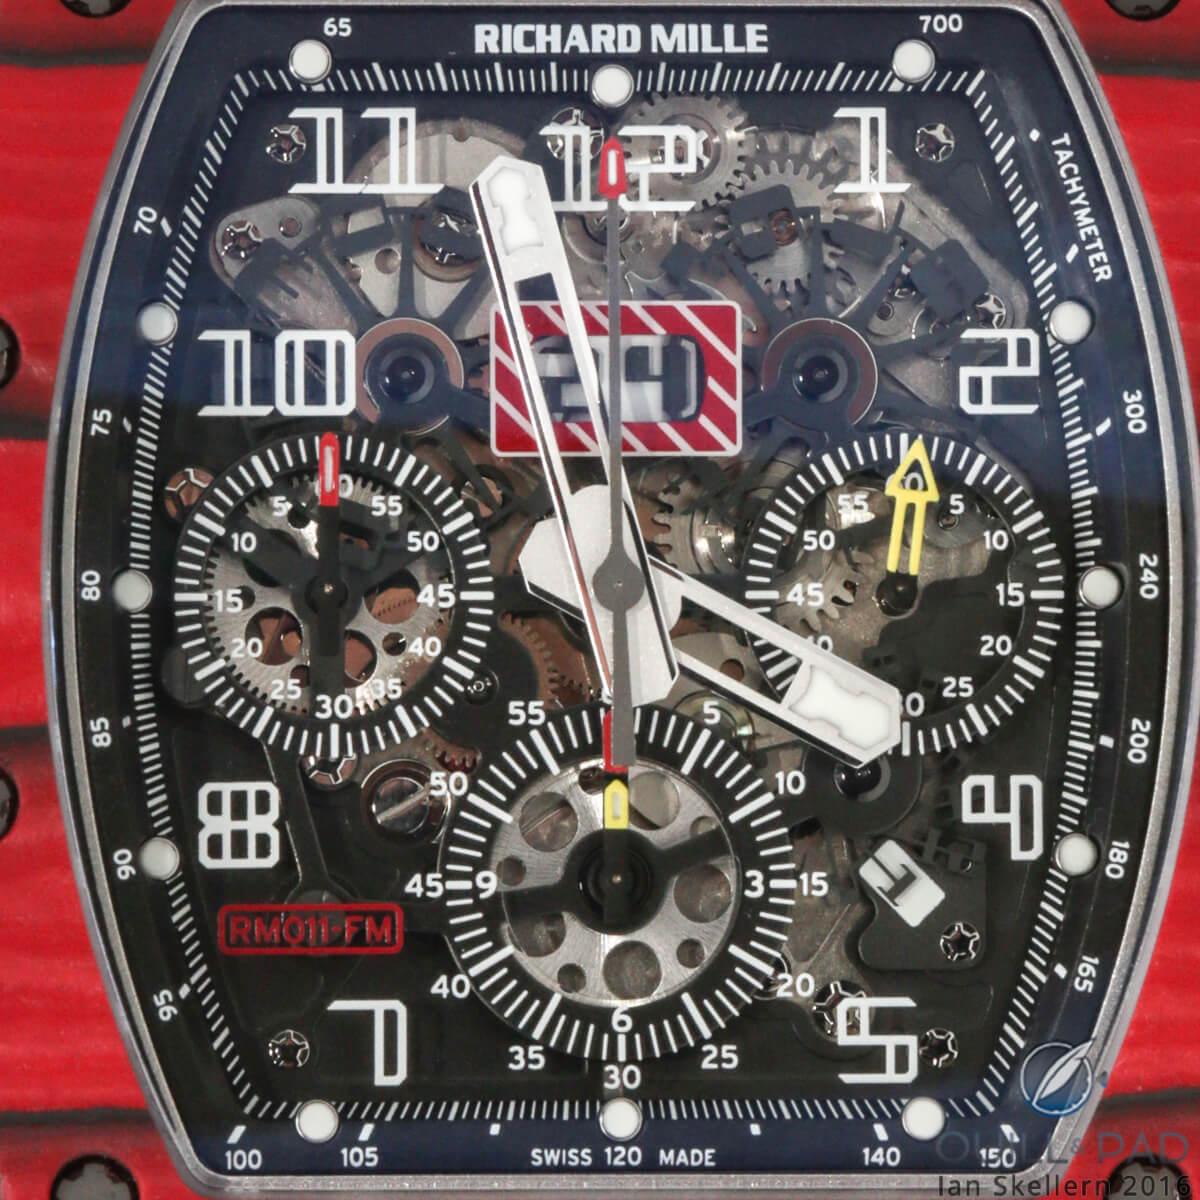 A close look at the dial side of the Richard Mille RM 011 Red TPT Quartz Automatic Flyback Chronograph